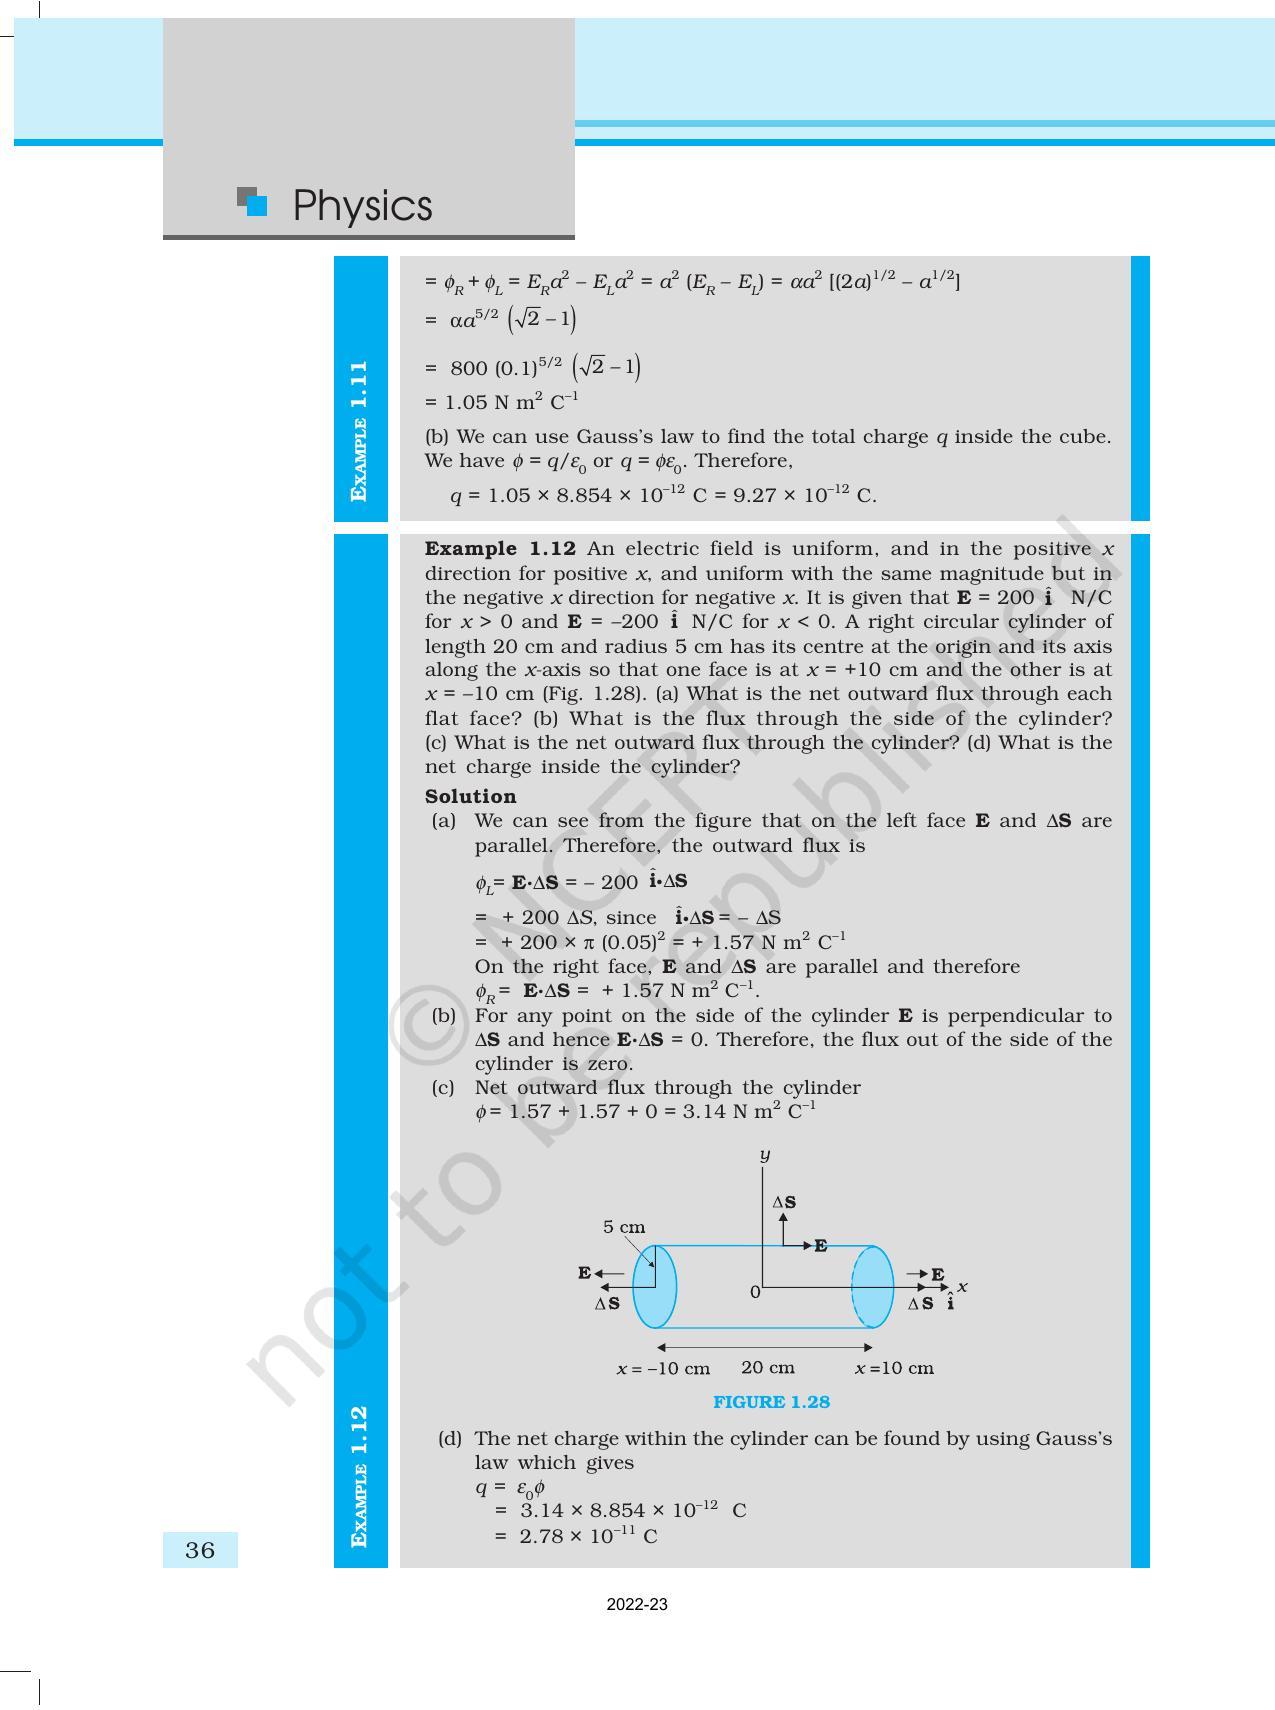 NCERT Book for Class 12 Physics Chapter 1 Electric Charges and Fields - Page 36